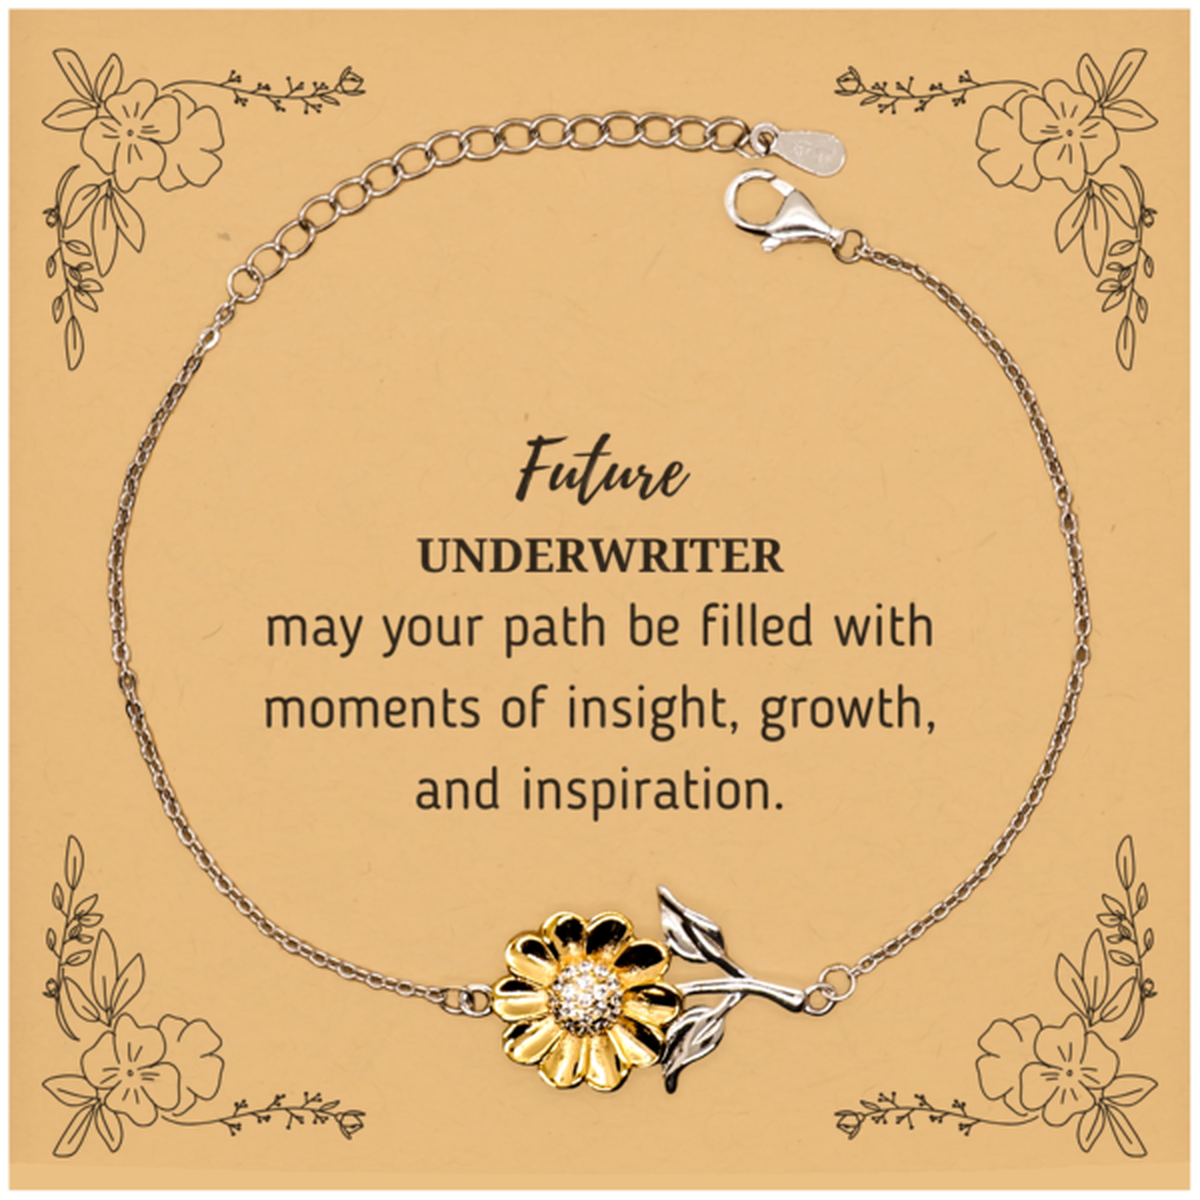 Future Underwriter Gifts, May your path be filled with moments of insight, Graduation Gifts for New Underwriter, Christmas Unique Sunflower Bracelet For Men, Women, Friends